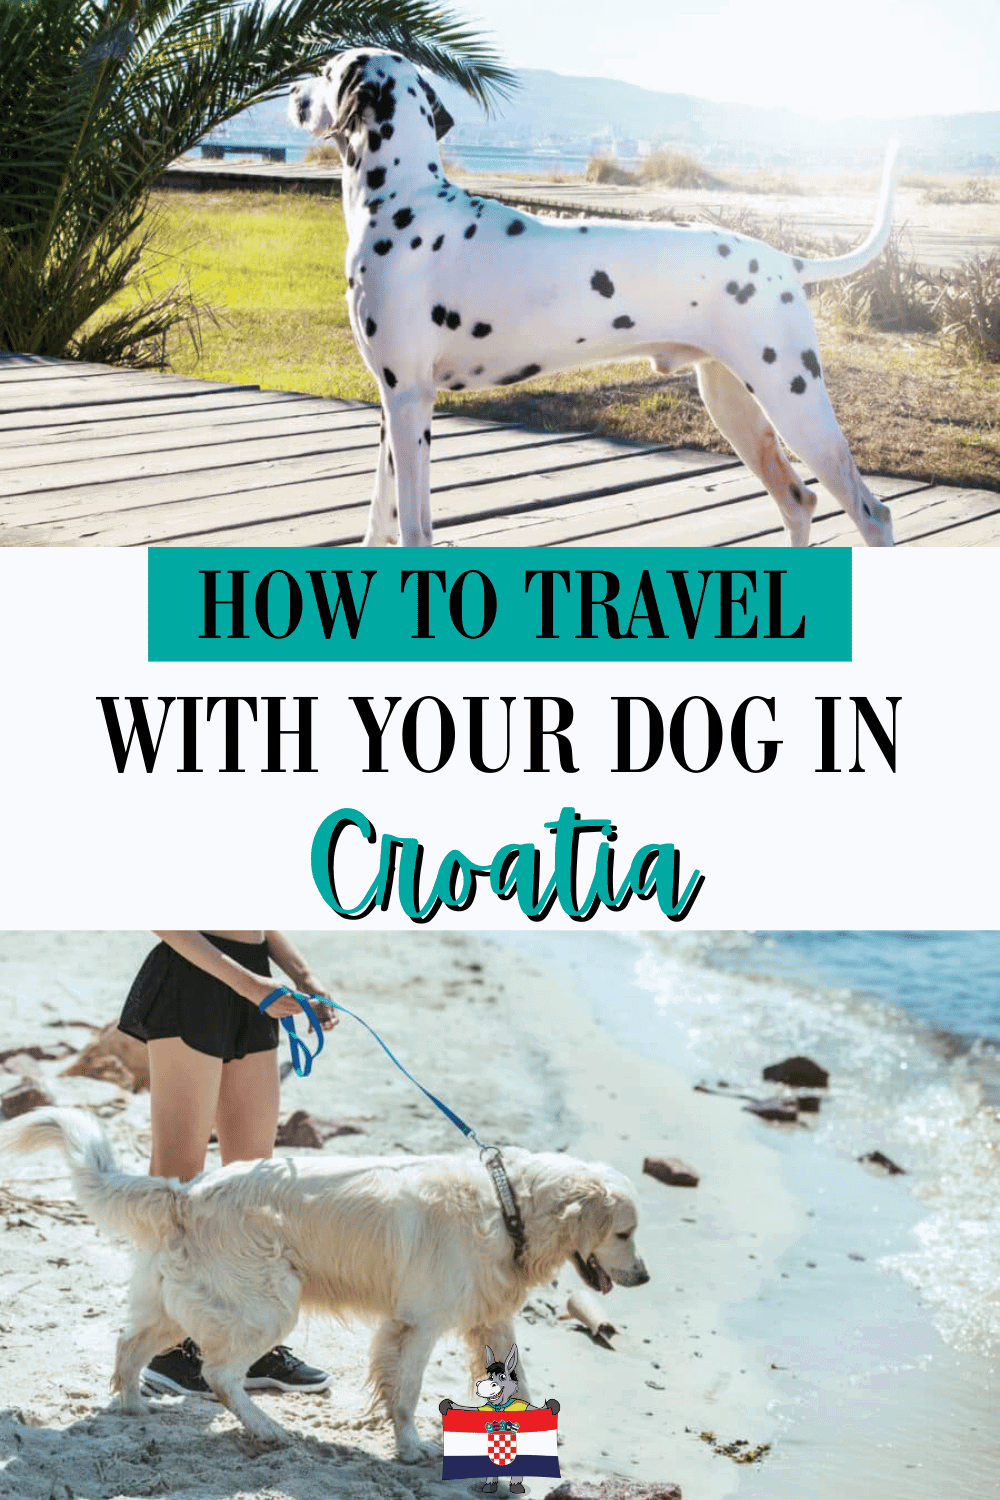 Croatia Travel Blog_How To Travel With Your Dog In Croatia